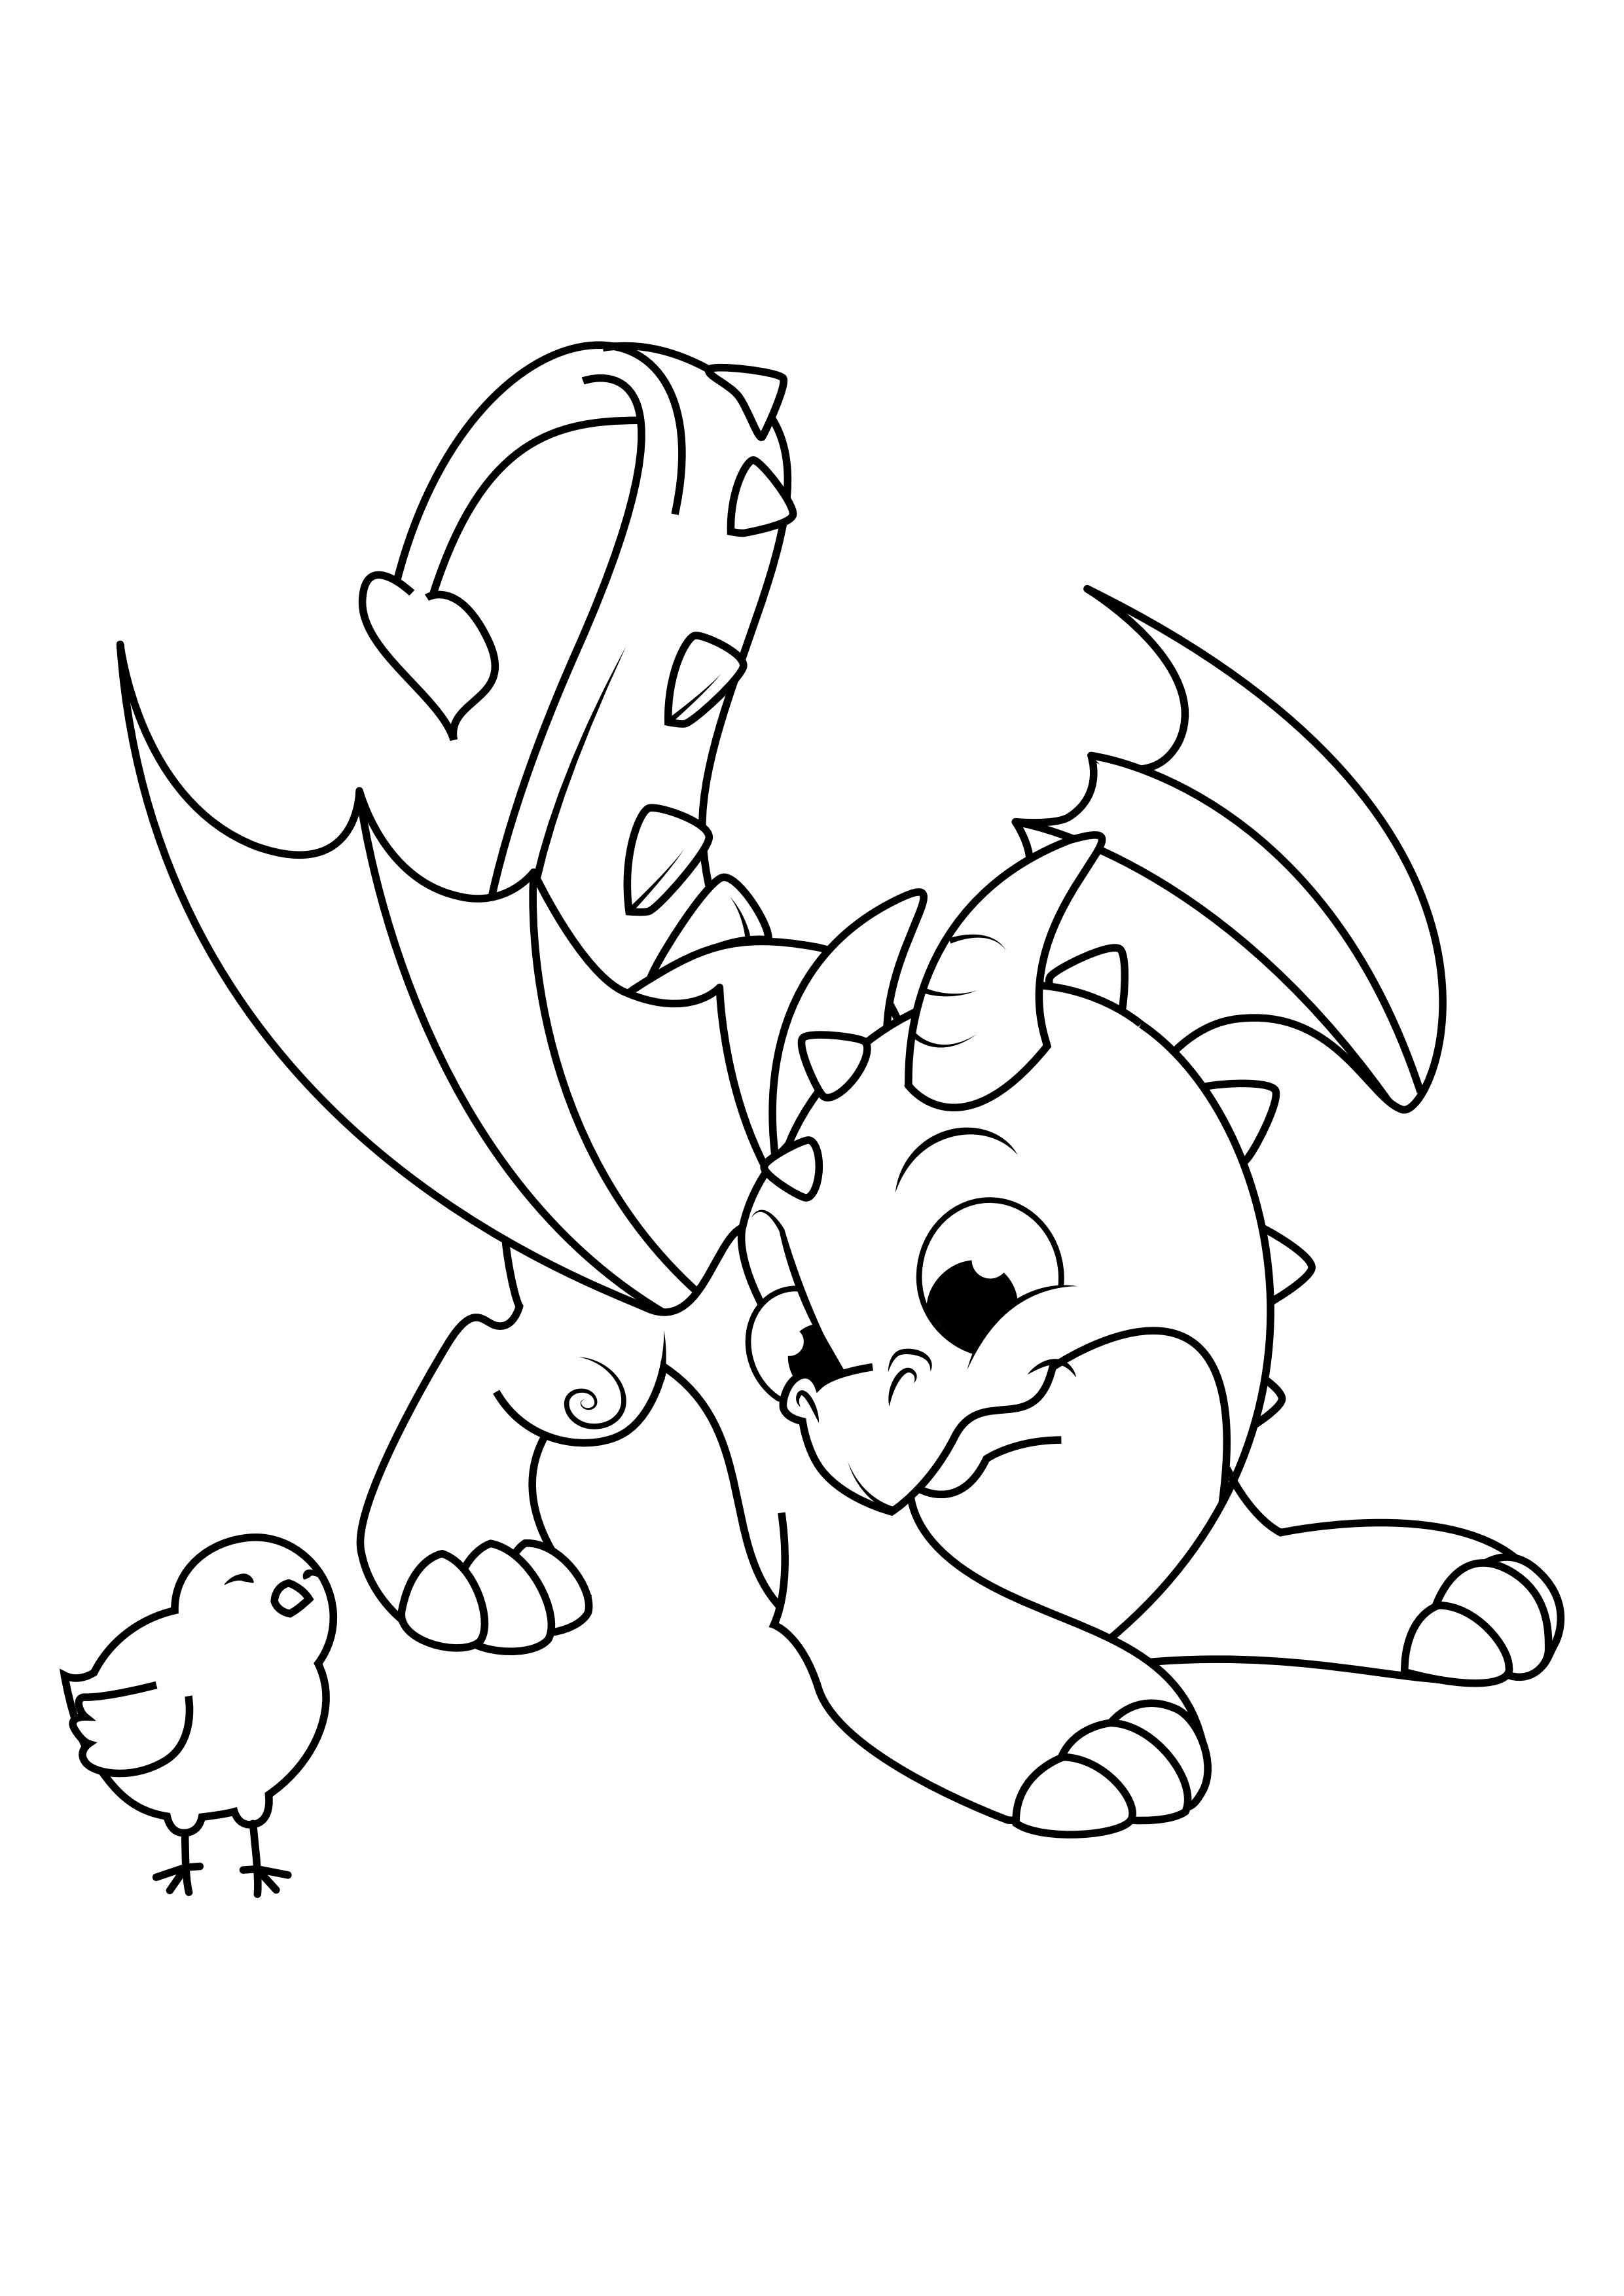 Coloring page dragon plays with chick